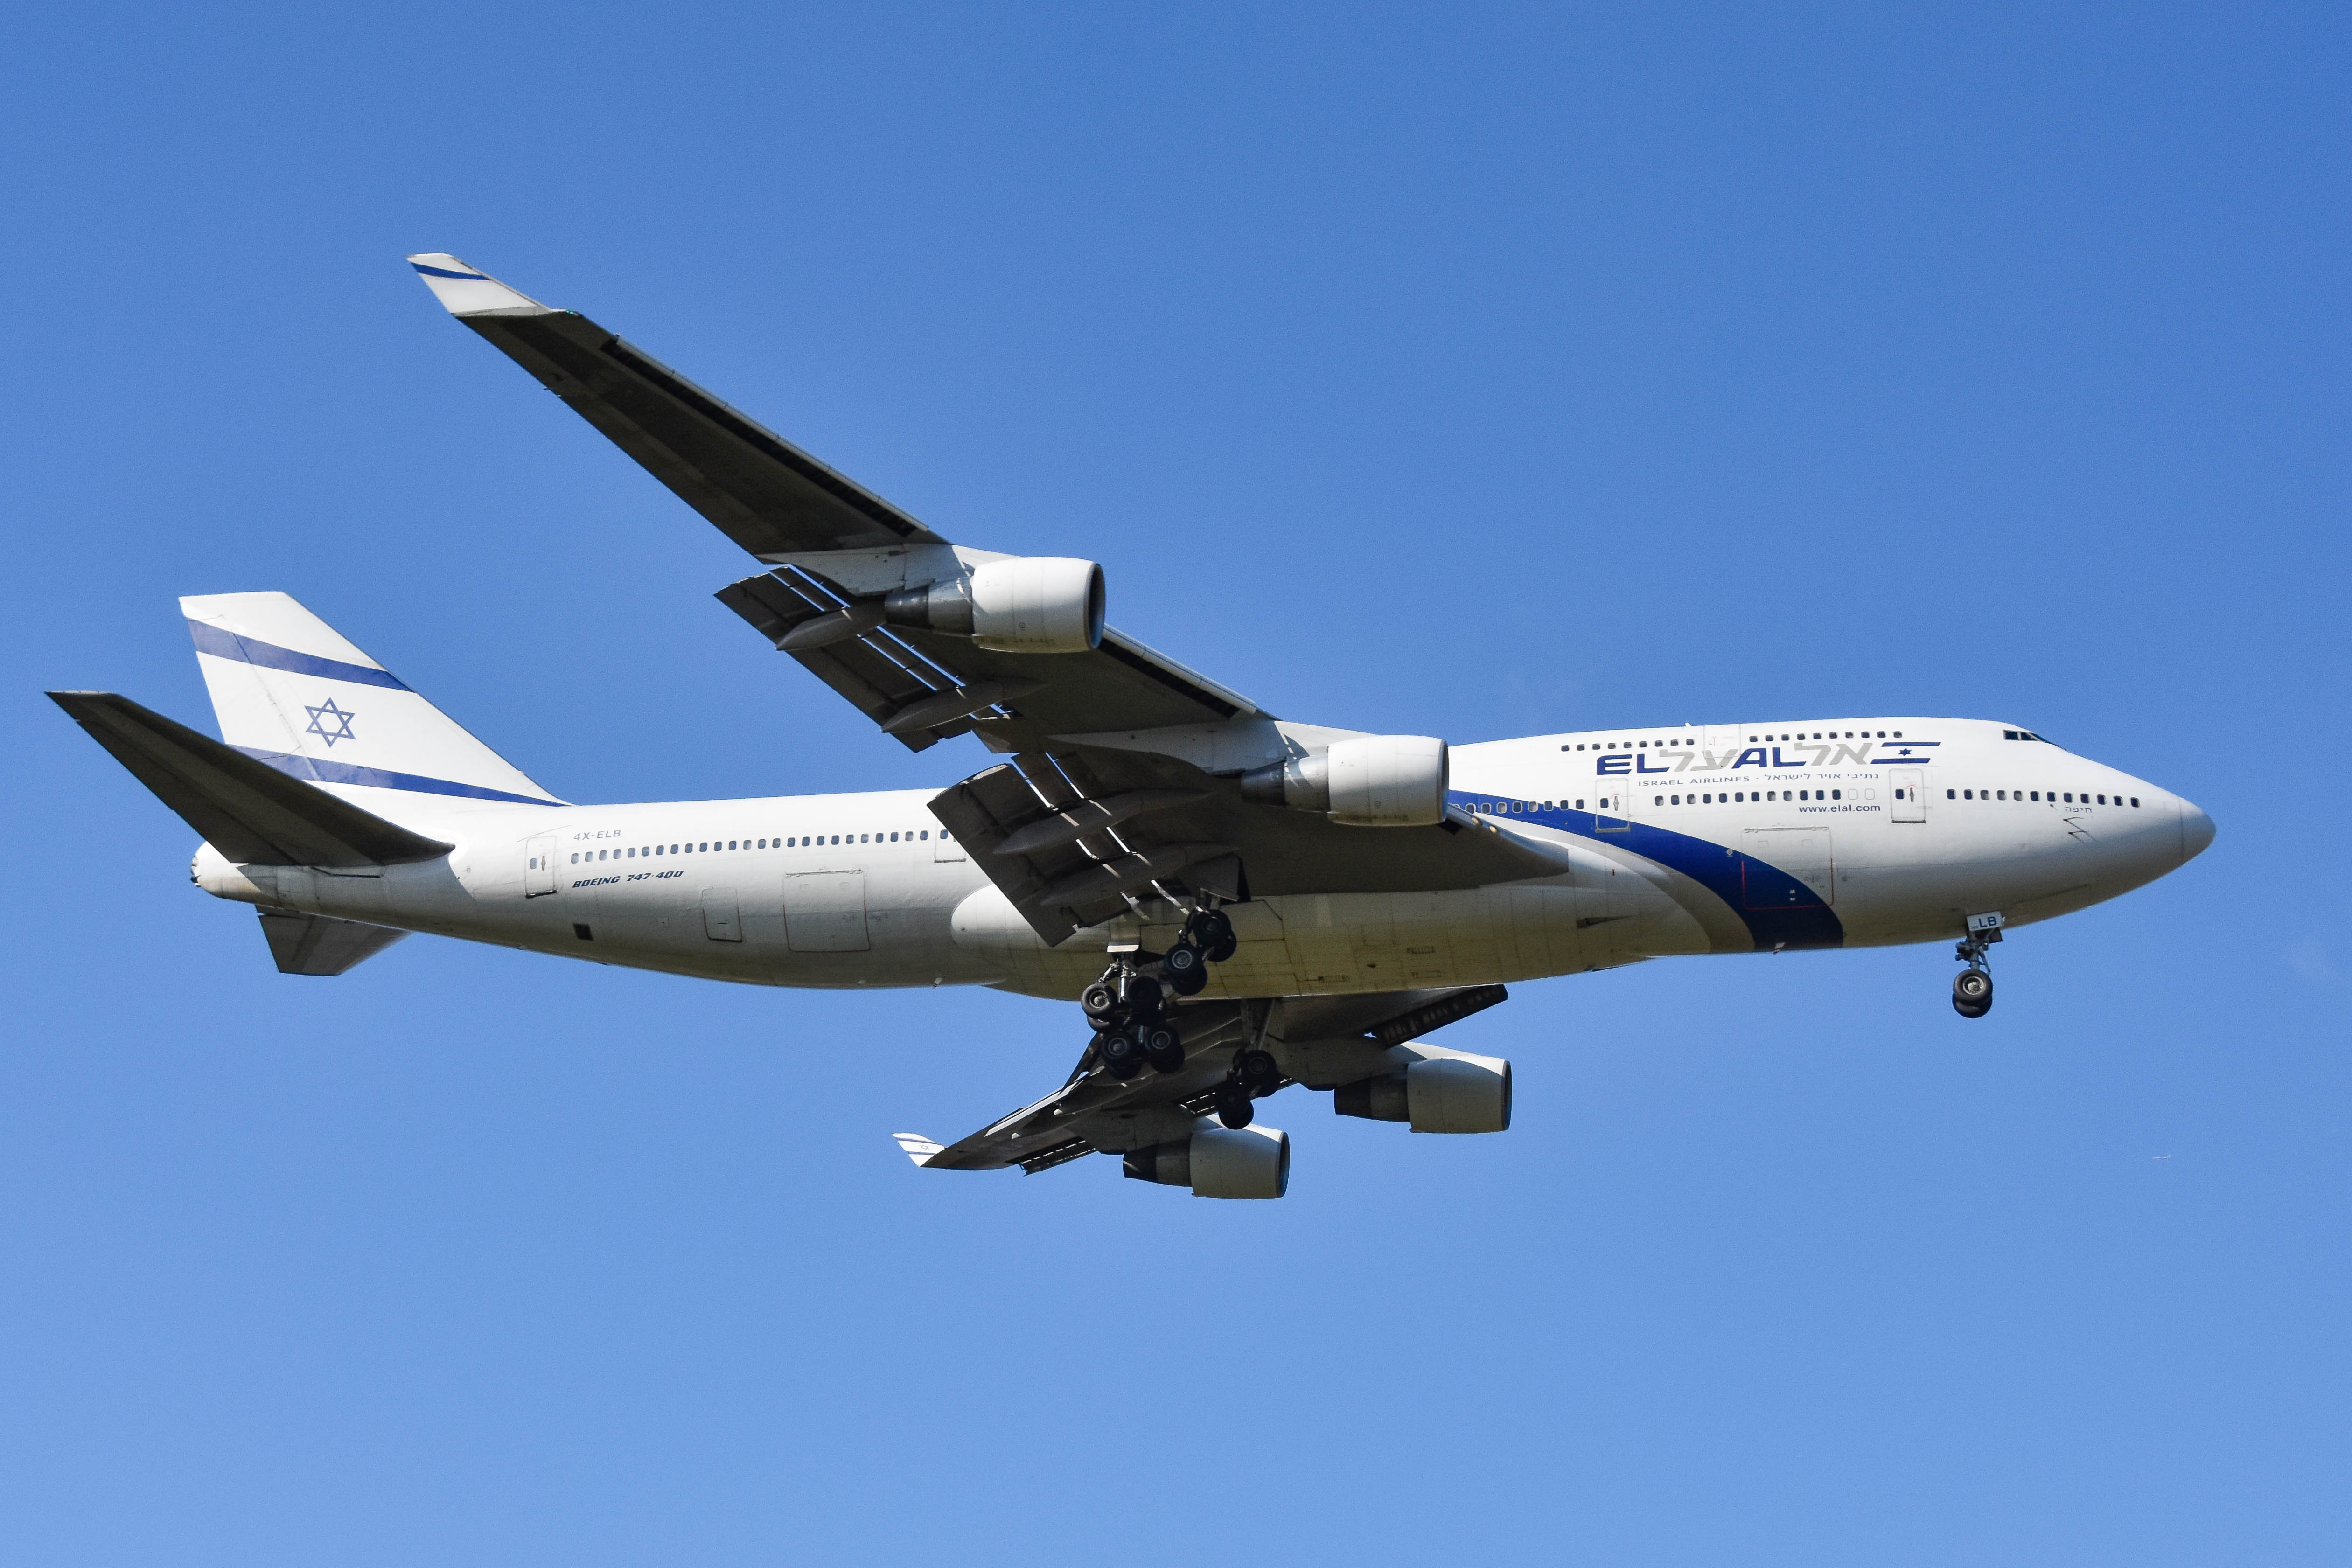 4X-ELB/4XELB Withdrawn from use Boeing 747 Airframe Information - AVSpotters.com